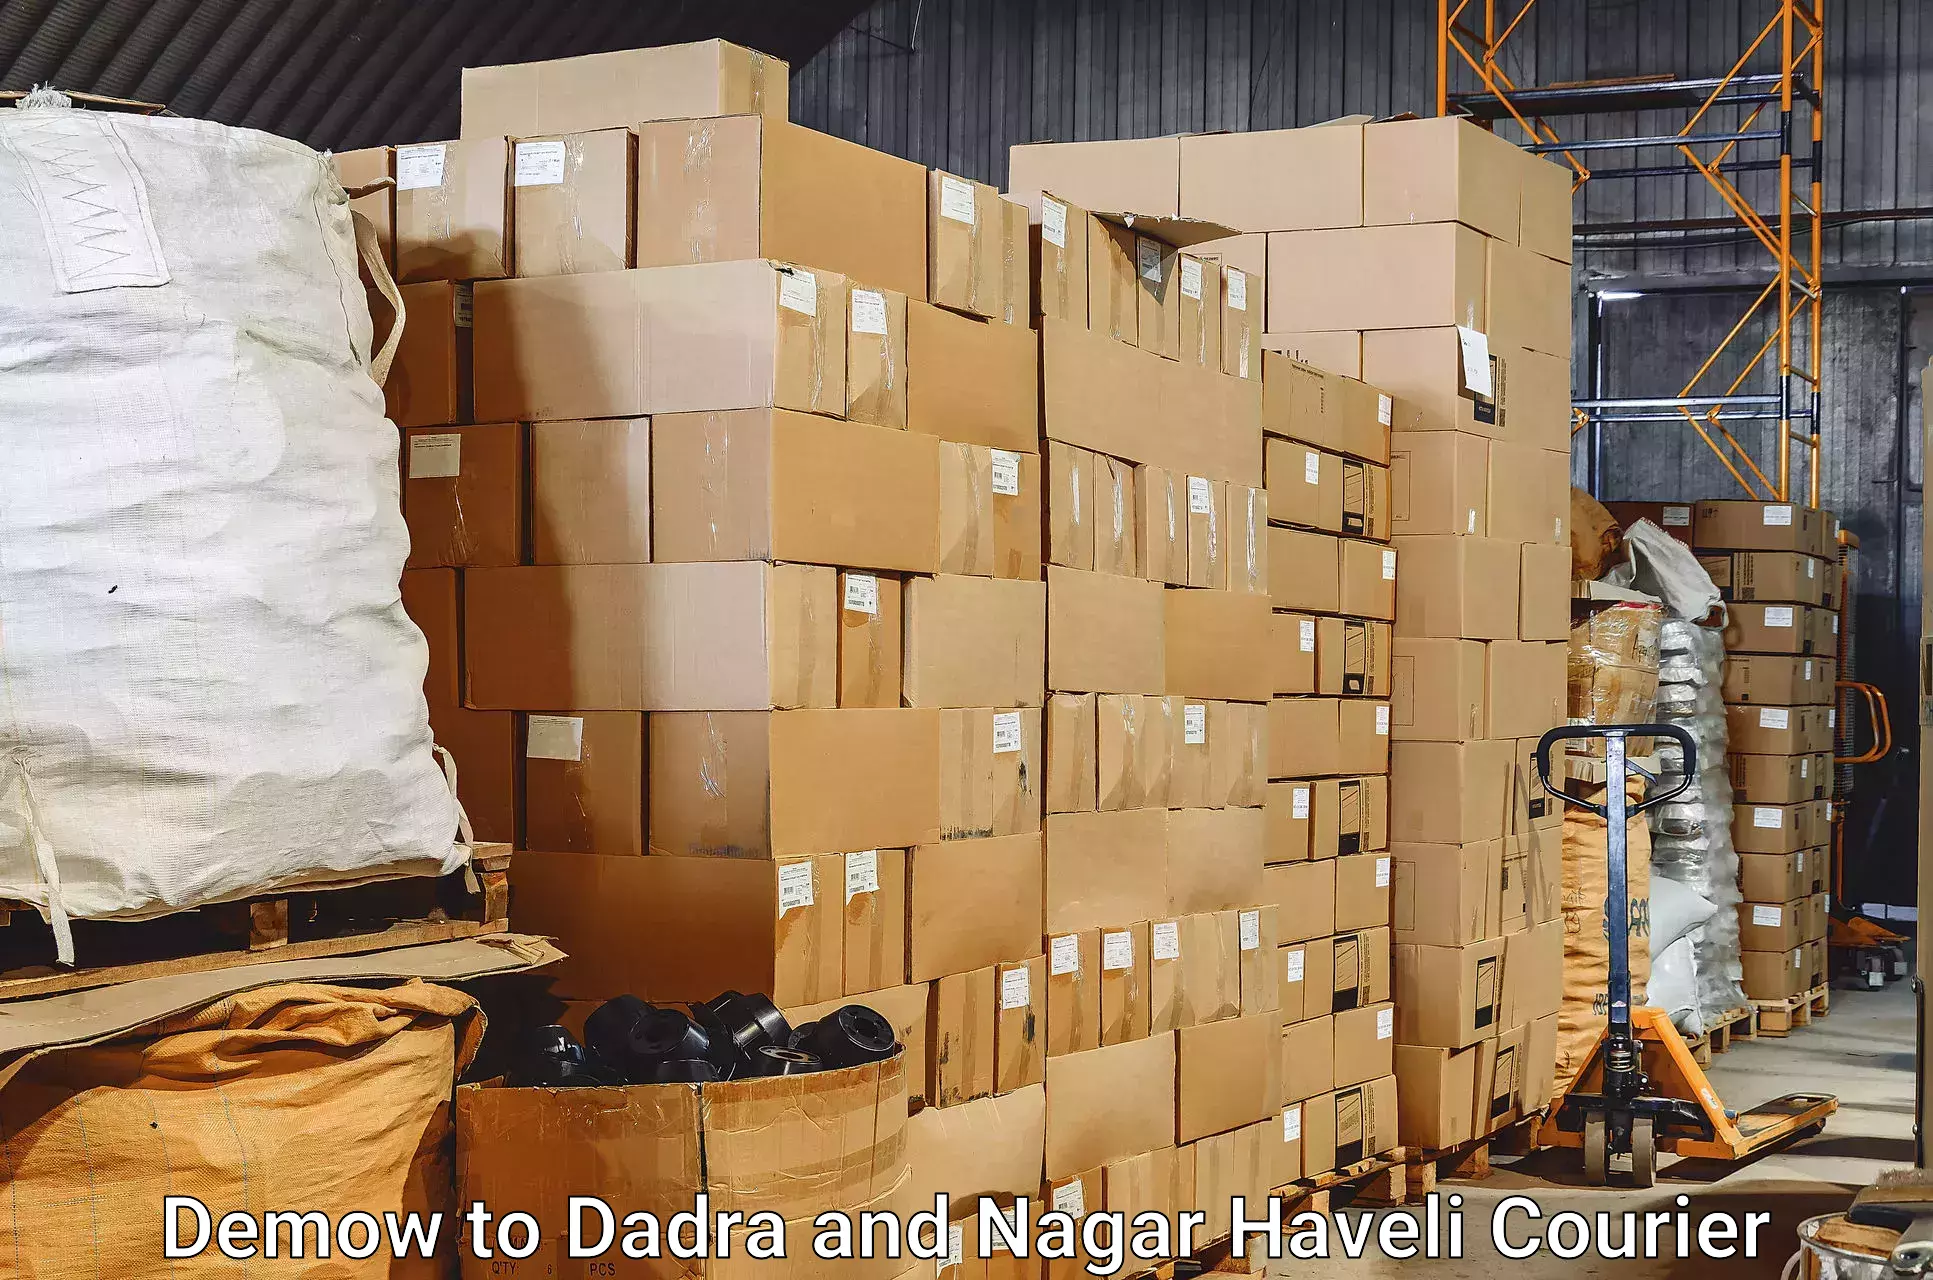 Luggage transport consultancy Demow to Dadra and Nagar Haveli